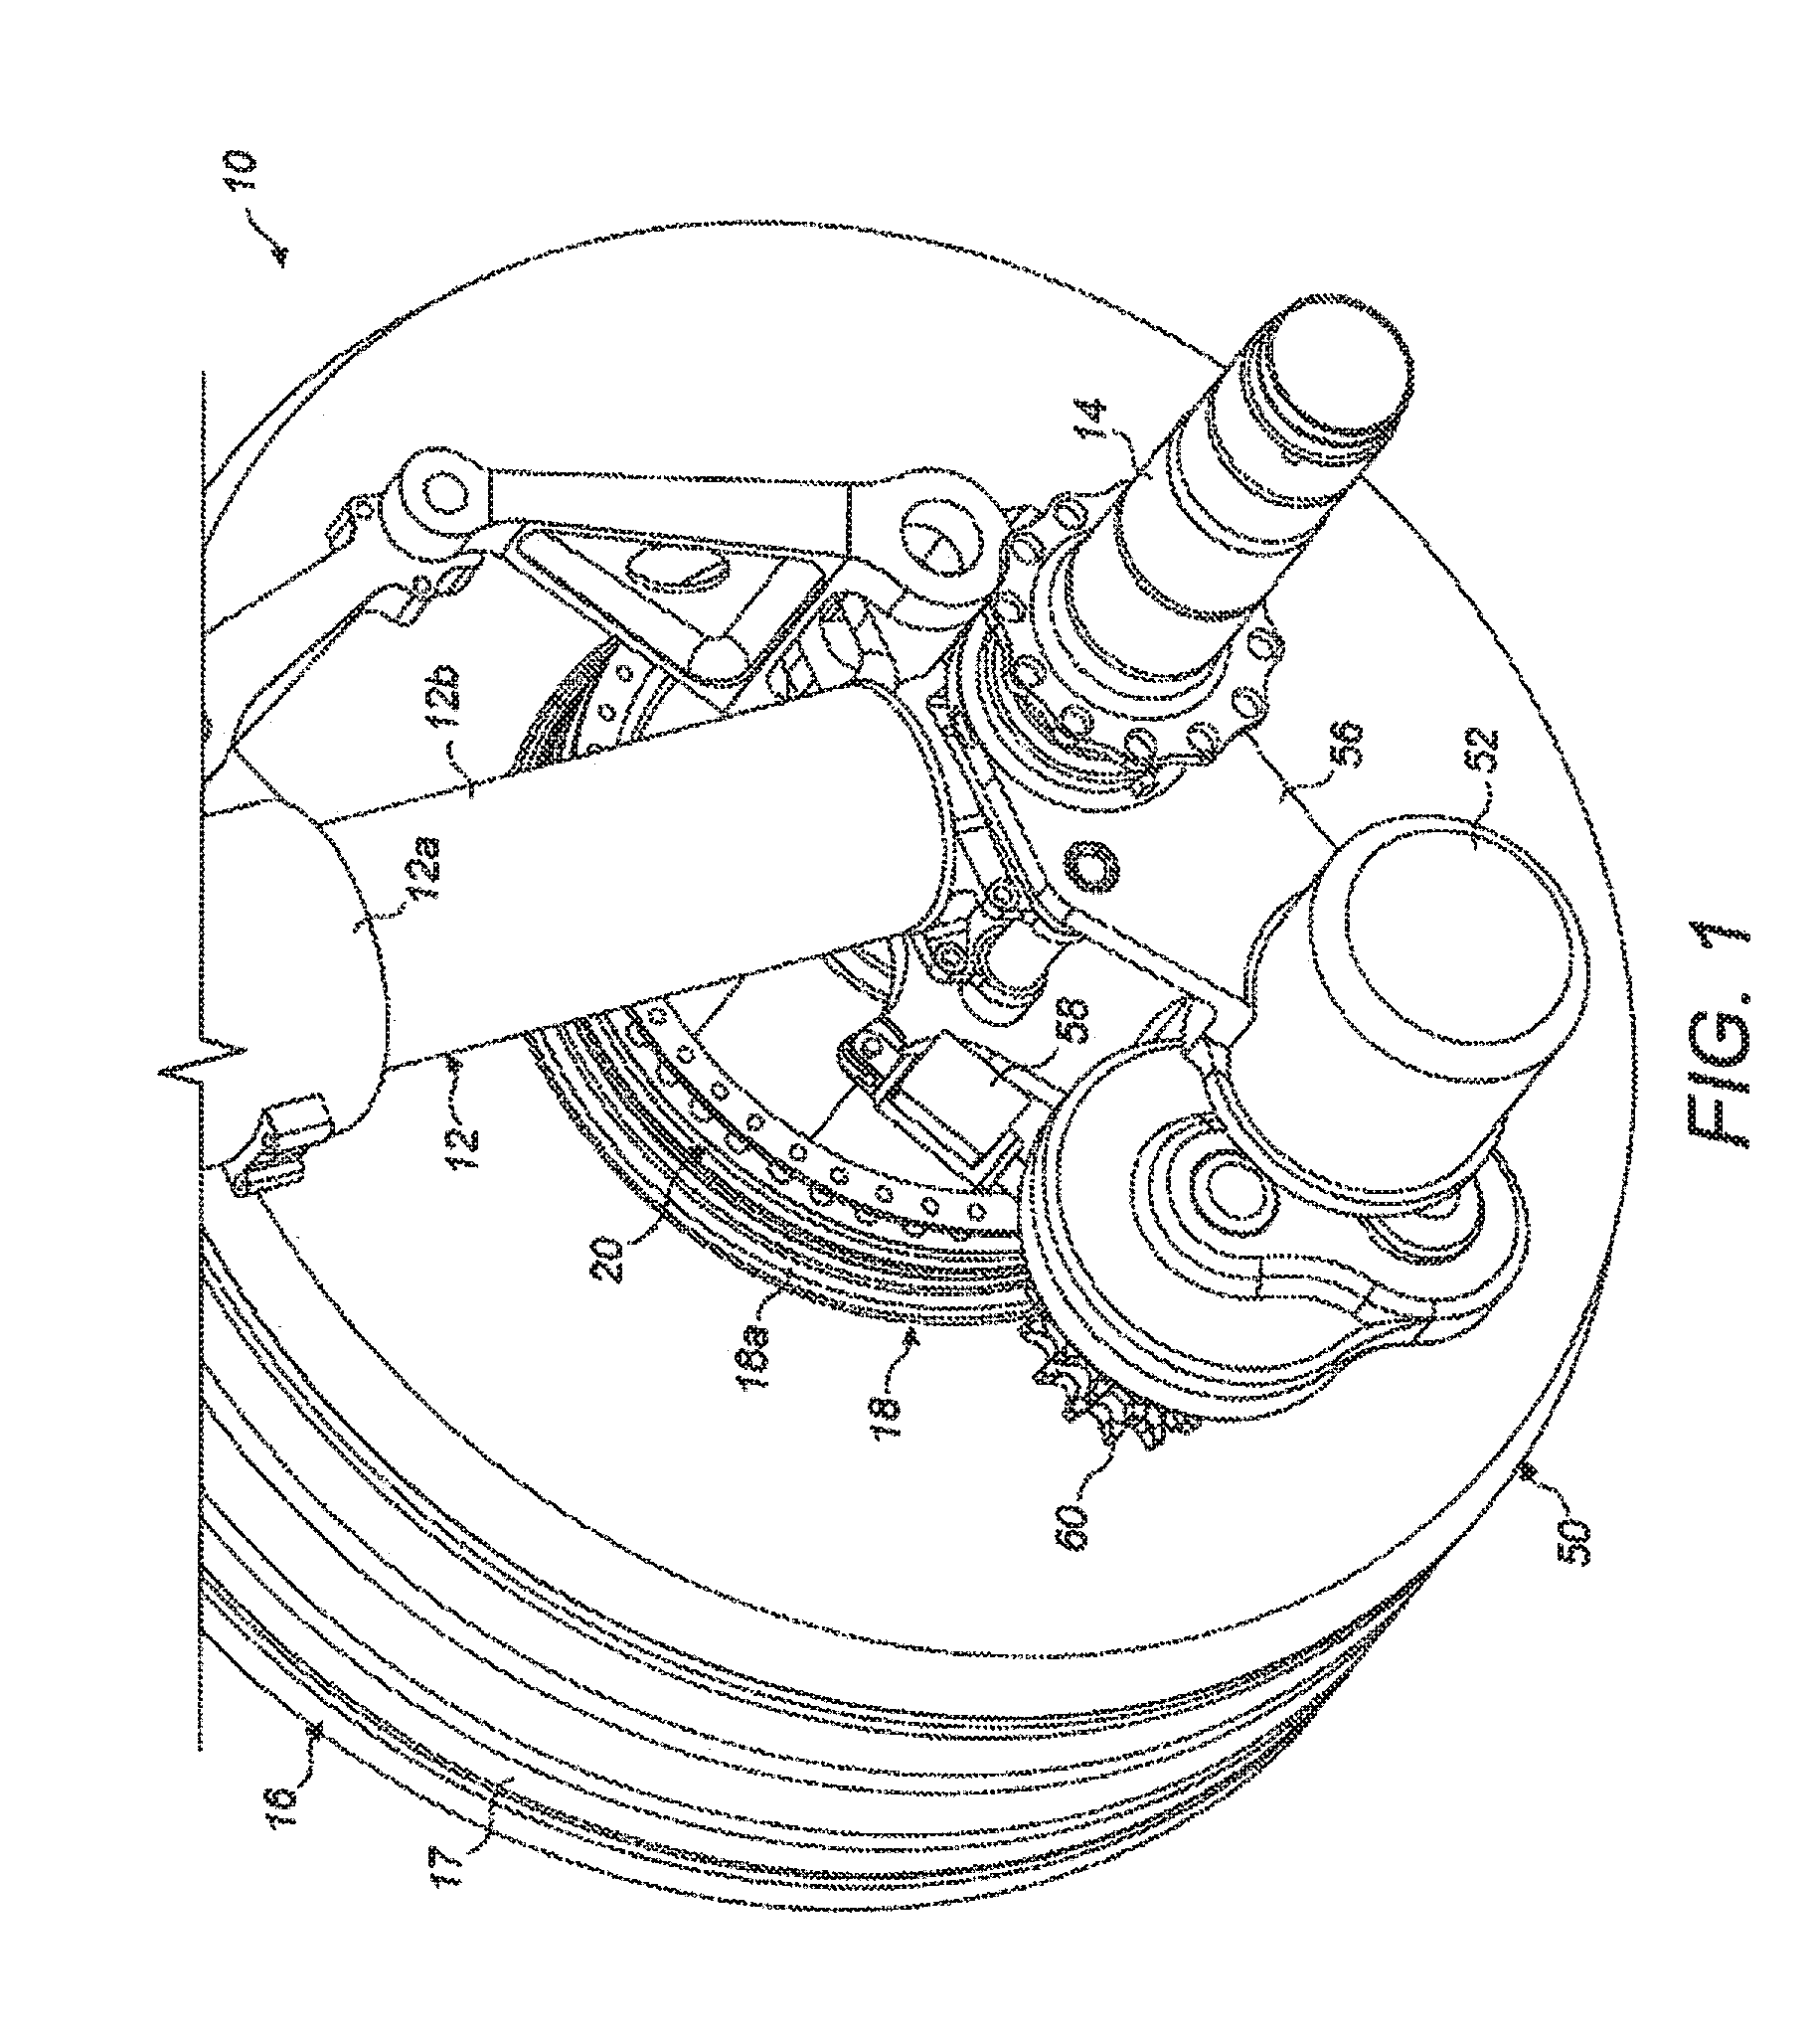 Drive system for aircraft landing gear